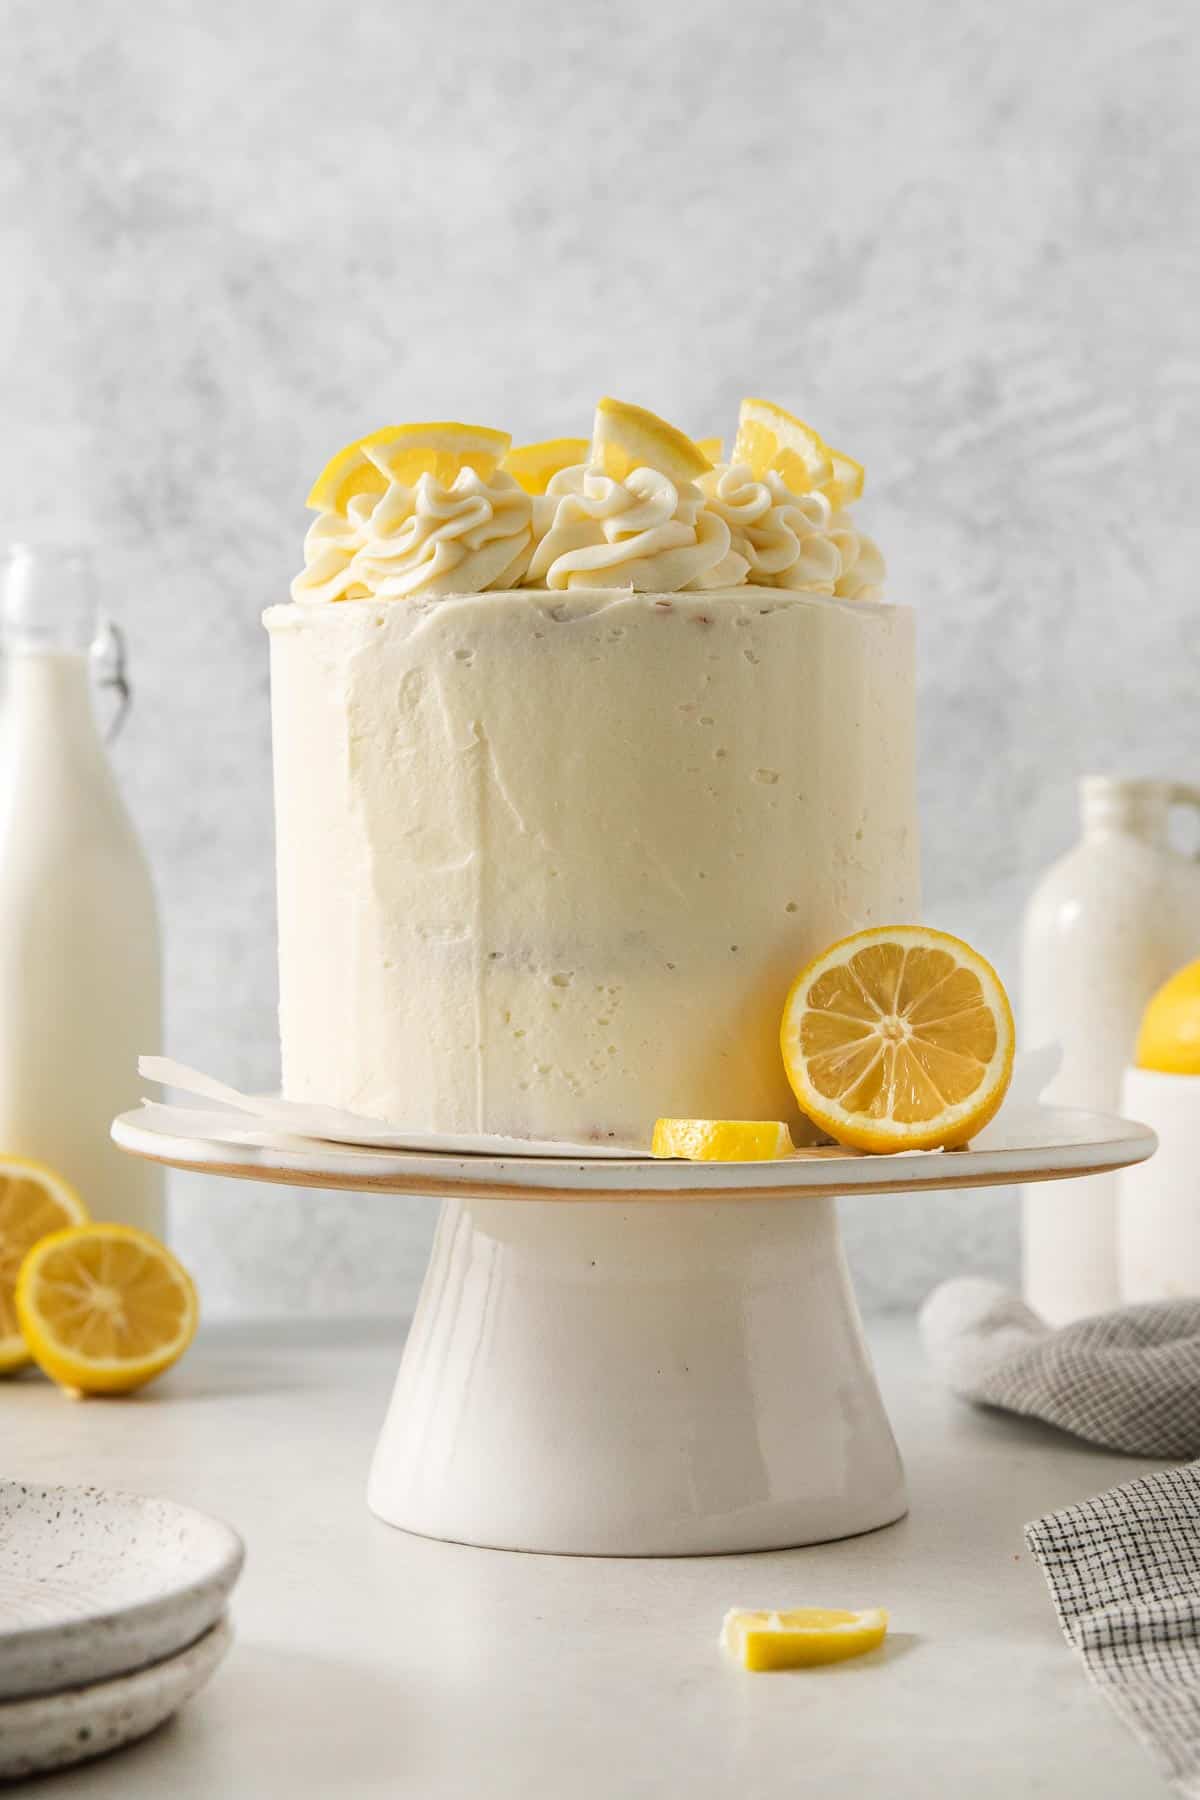 Gluten-free lemon cake on a cake stand with lemons on top and on the side